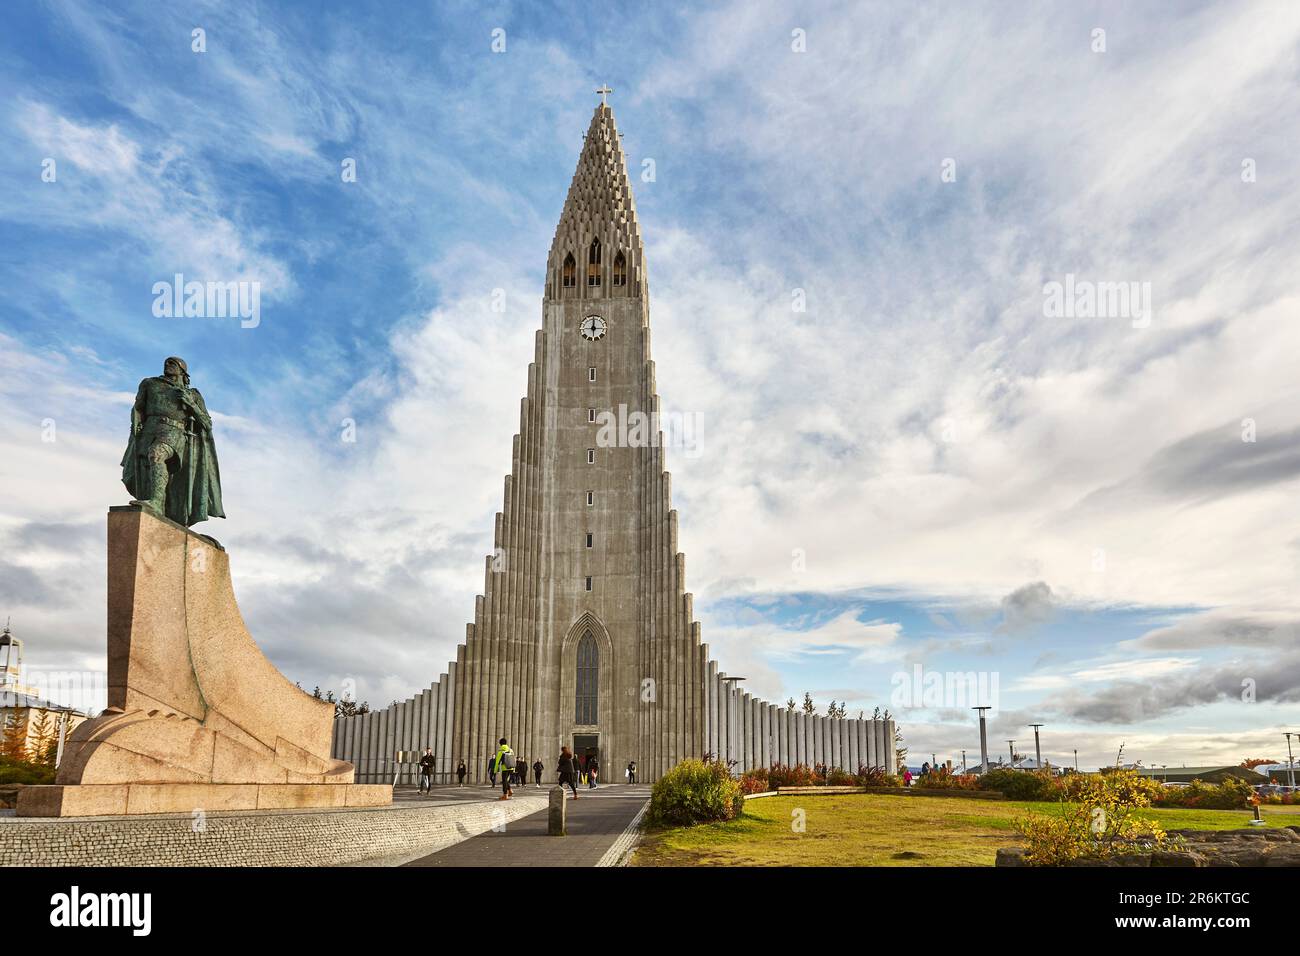 The spire of Hallgrimskirkja Church, fronted by a statue of Leifur Eriksson, founder of Iceland, in central Reykjavik, Iceland, Polar Regions Stock Photo